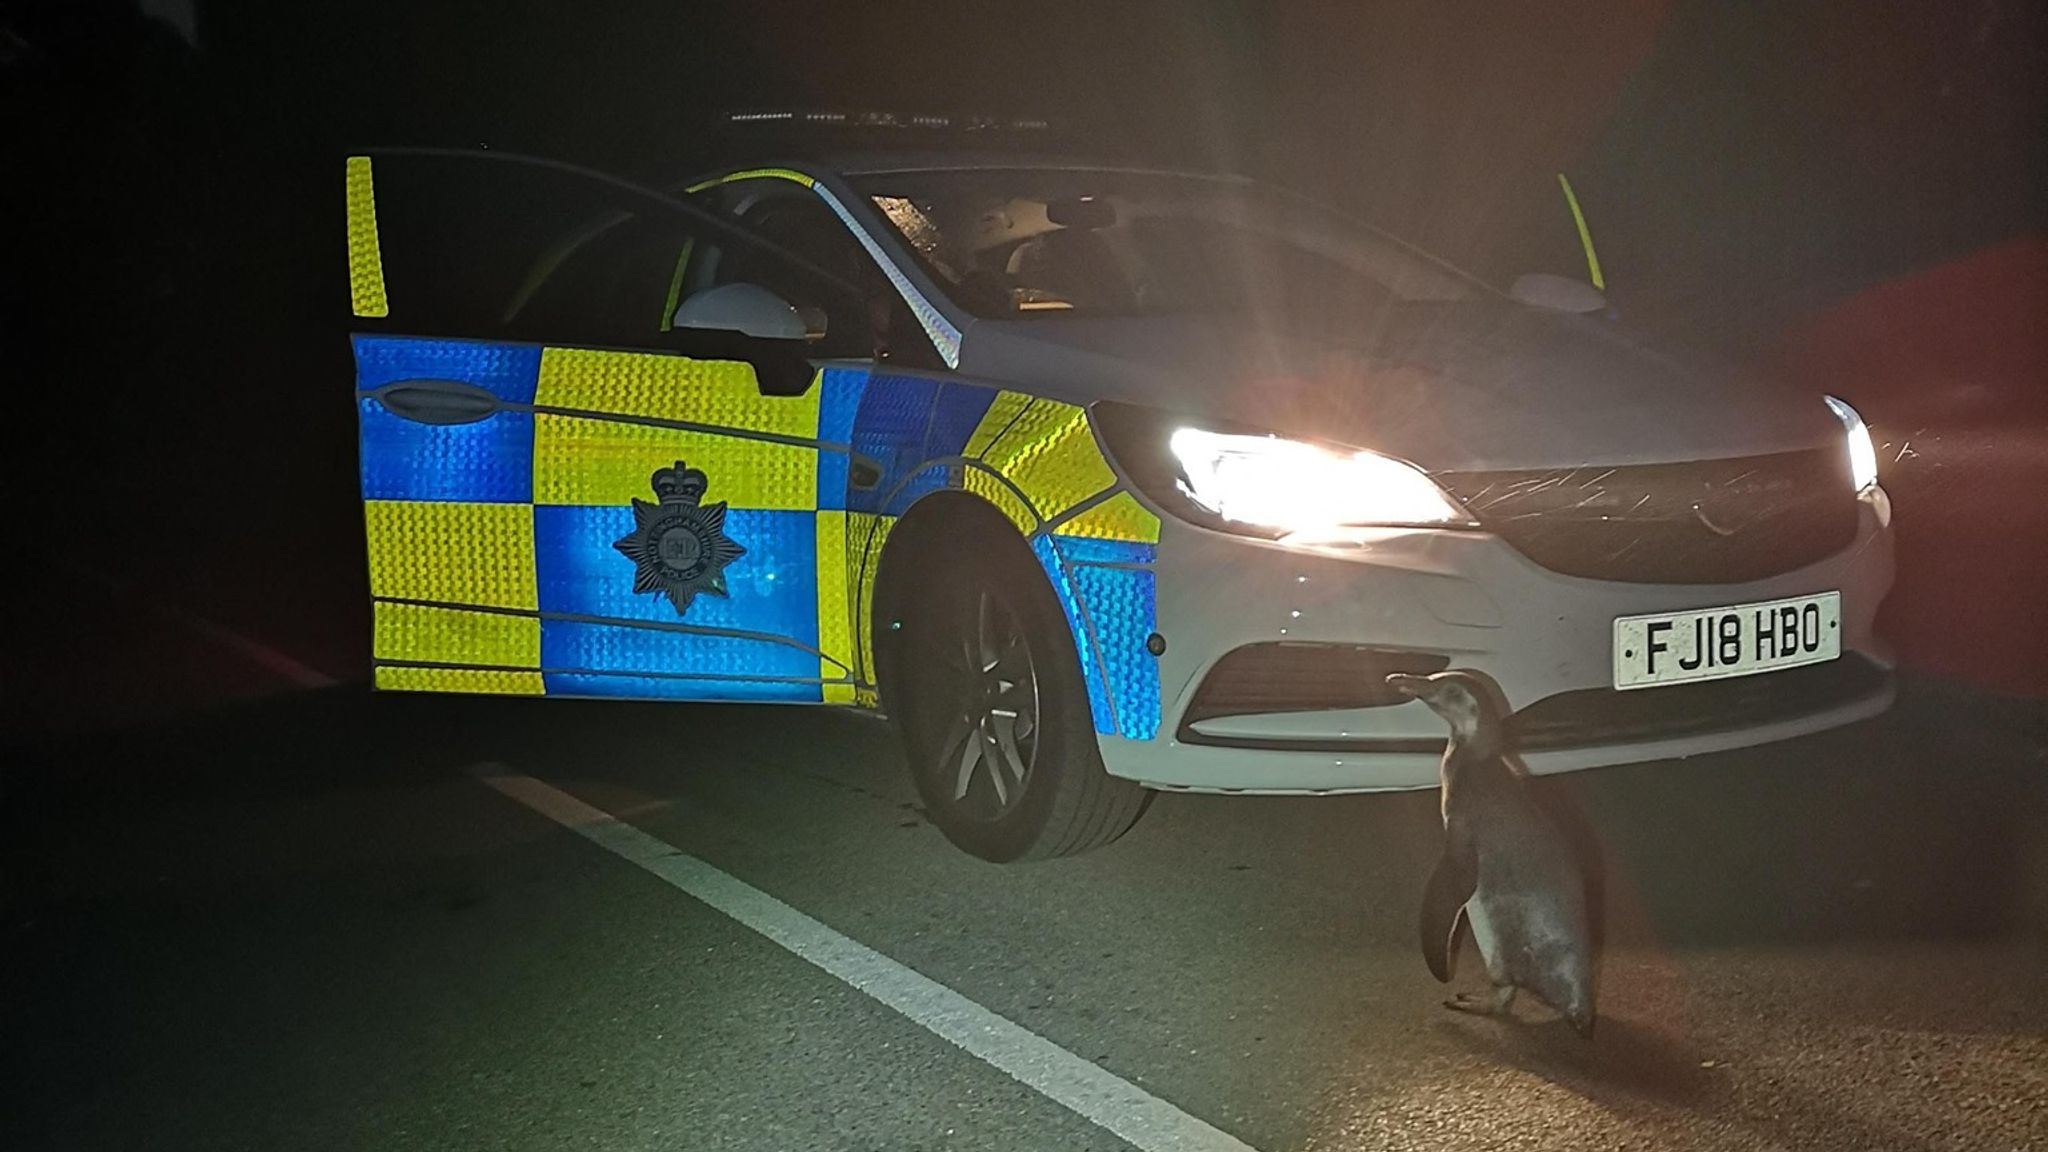 Police spotted the penguin while on patrol in Strelley, Nottinghamshire